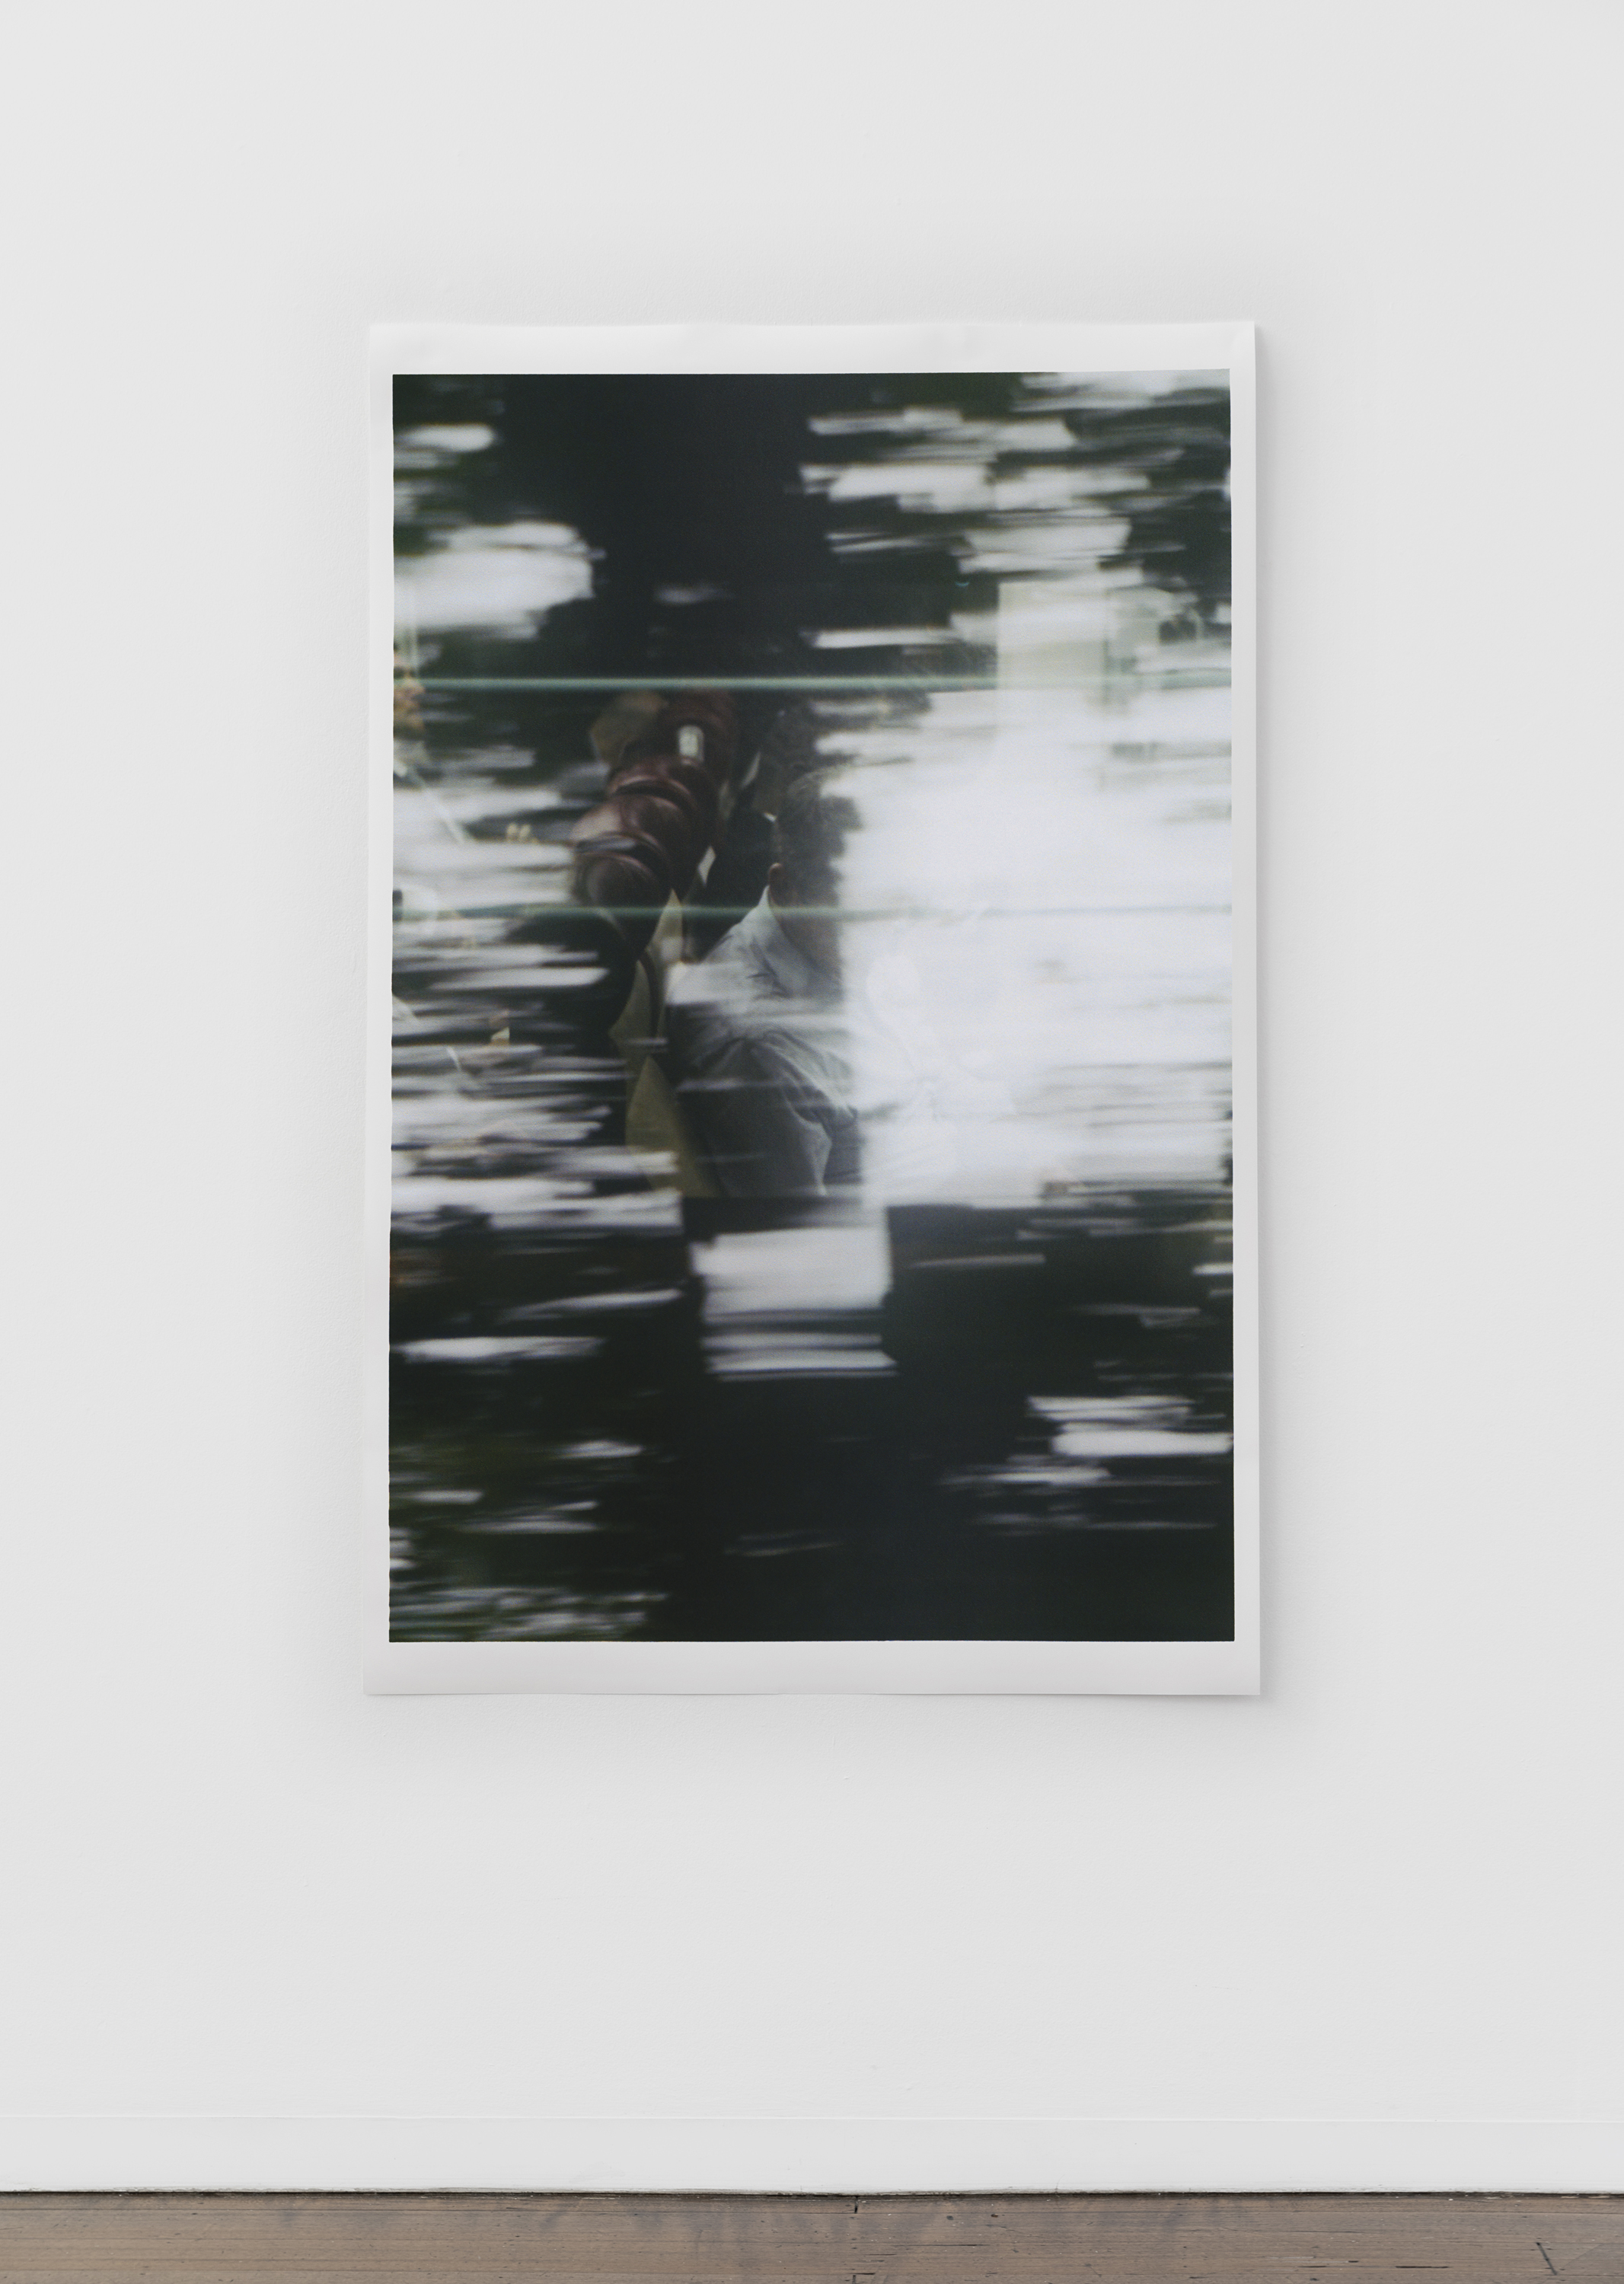   Untitled (figure, glass, landscape) , pigment print on paper, sheet: 168 × 110 cm (66 1/8 × 43 1/4 in), framed: 178.9 × 120.2 cm (70 1/2 × 47 3/8 in), 2019  Installation view of “the sacredness of something” at Arc One Gallery, Melbourne (2019) 